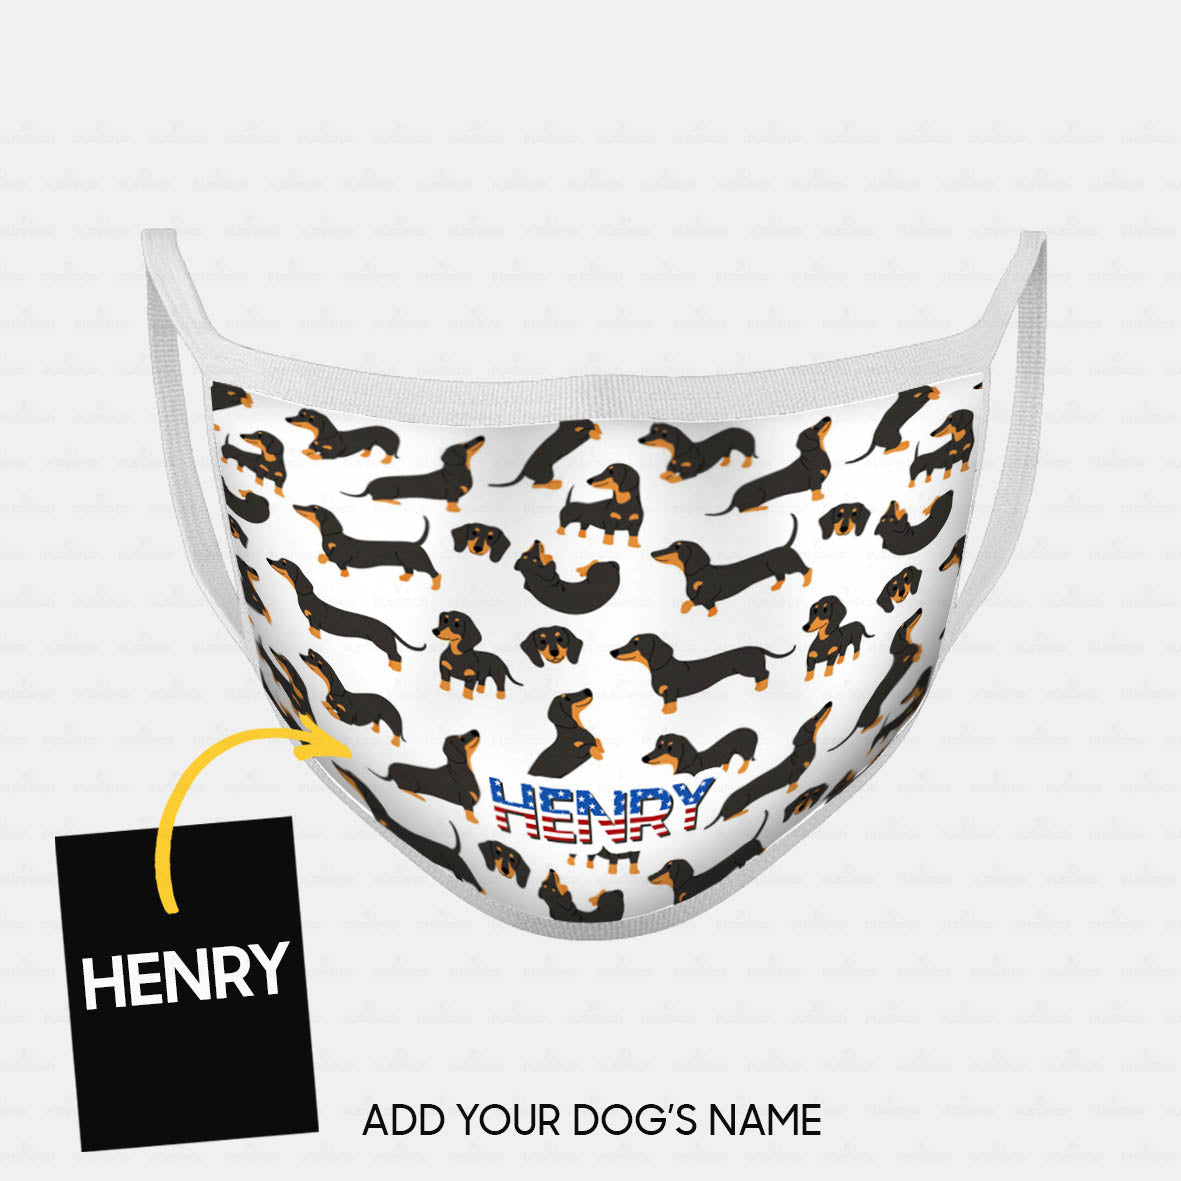 Personalized Dog Gift Idea - Lots Of Dachshund On White For Dog Lovers - Cloth Mask